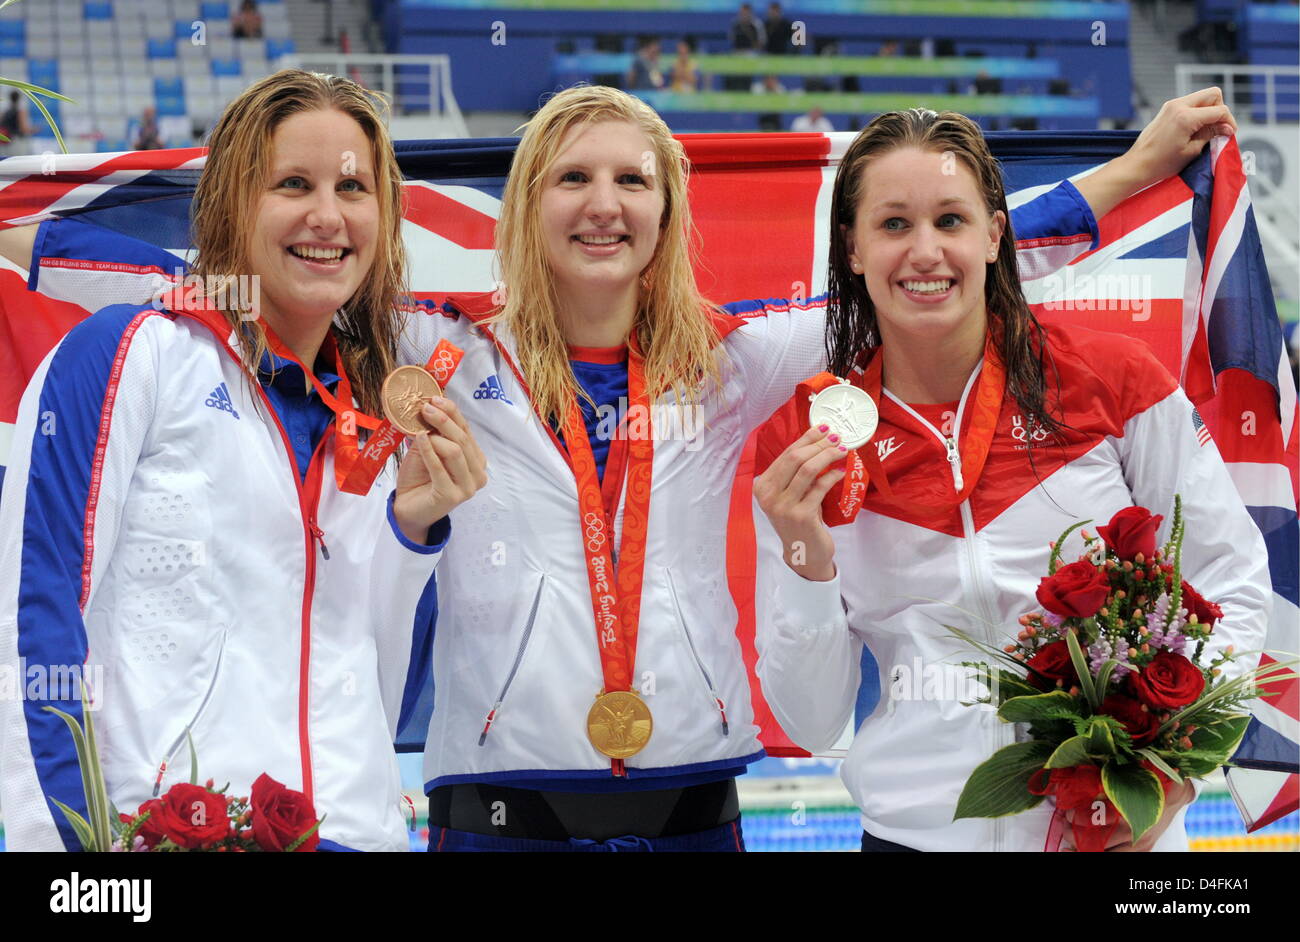 Bronzewinning Joanne Jackson (L-R) from Great Britain, her firstplaced compatriot Rebecca Adlington and silvermedal winner Katie Hoff of the USA celebrate after the medal ceremony for the women's 400M freestyle final at the National Aquatics Center at the Beijing 2008 Olympic Games in Beijing, China, 11 August 2008. Foto: Bernd Thissen dpa ###dpa### Stock Photo